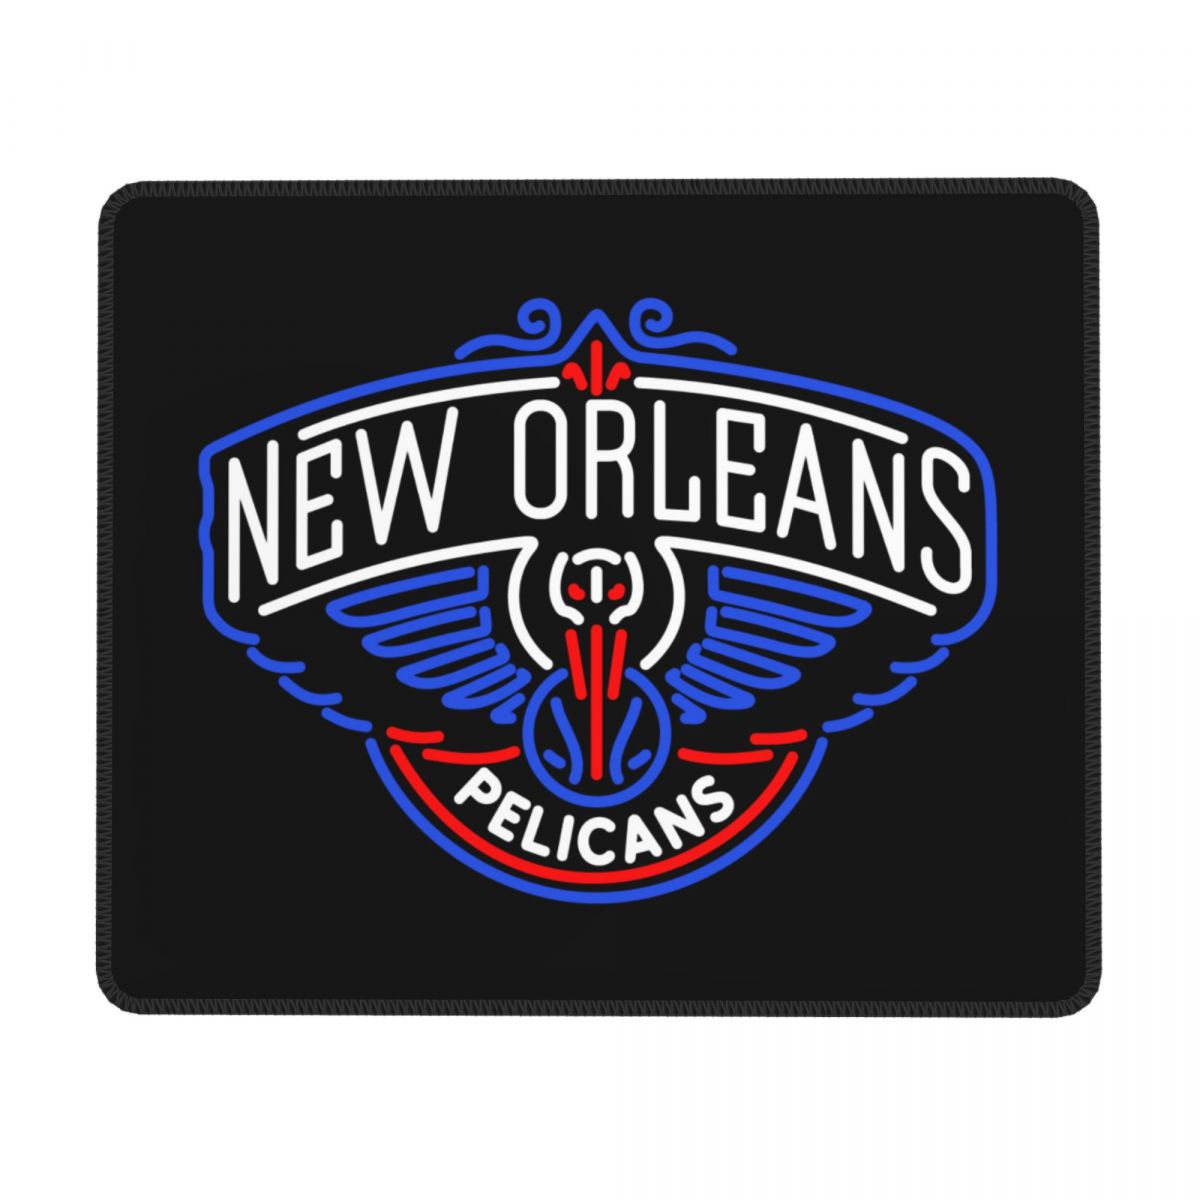 New Orleans Pelicans Black Square Waterproof Mouse Pad